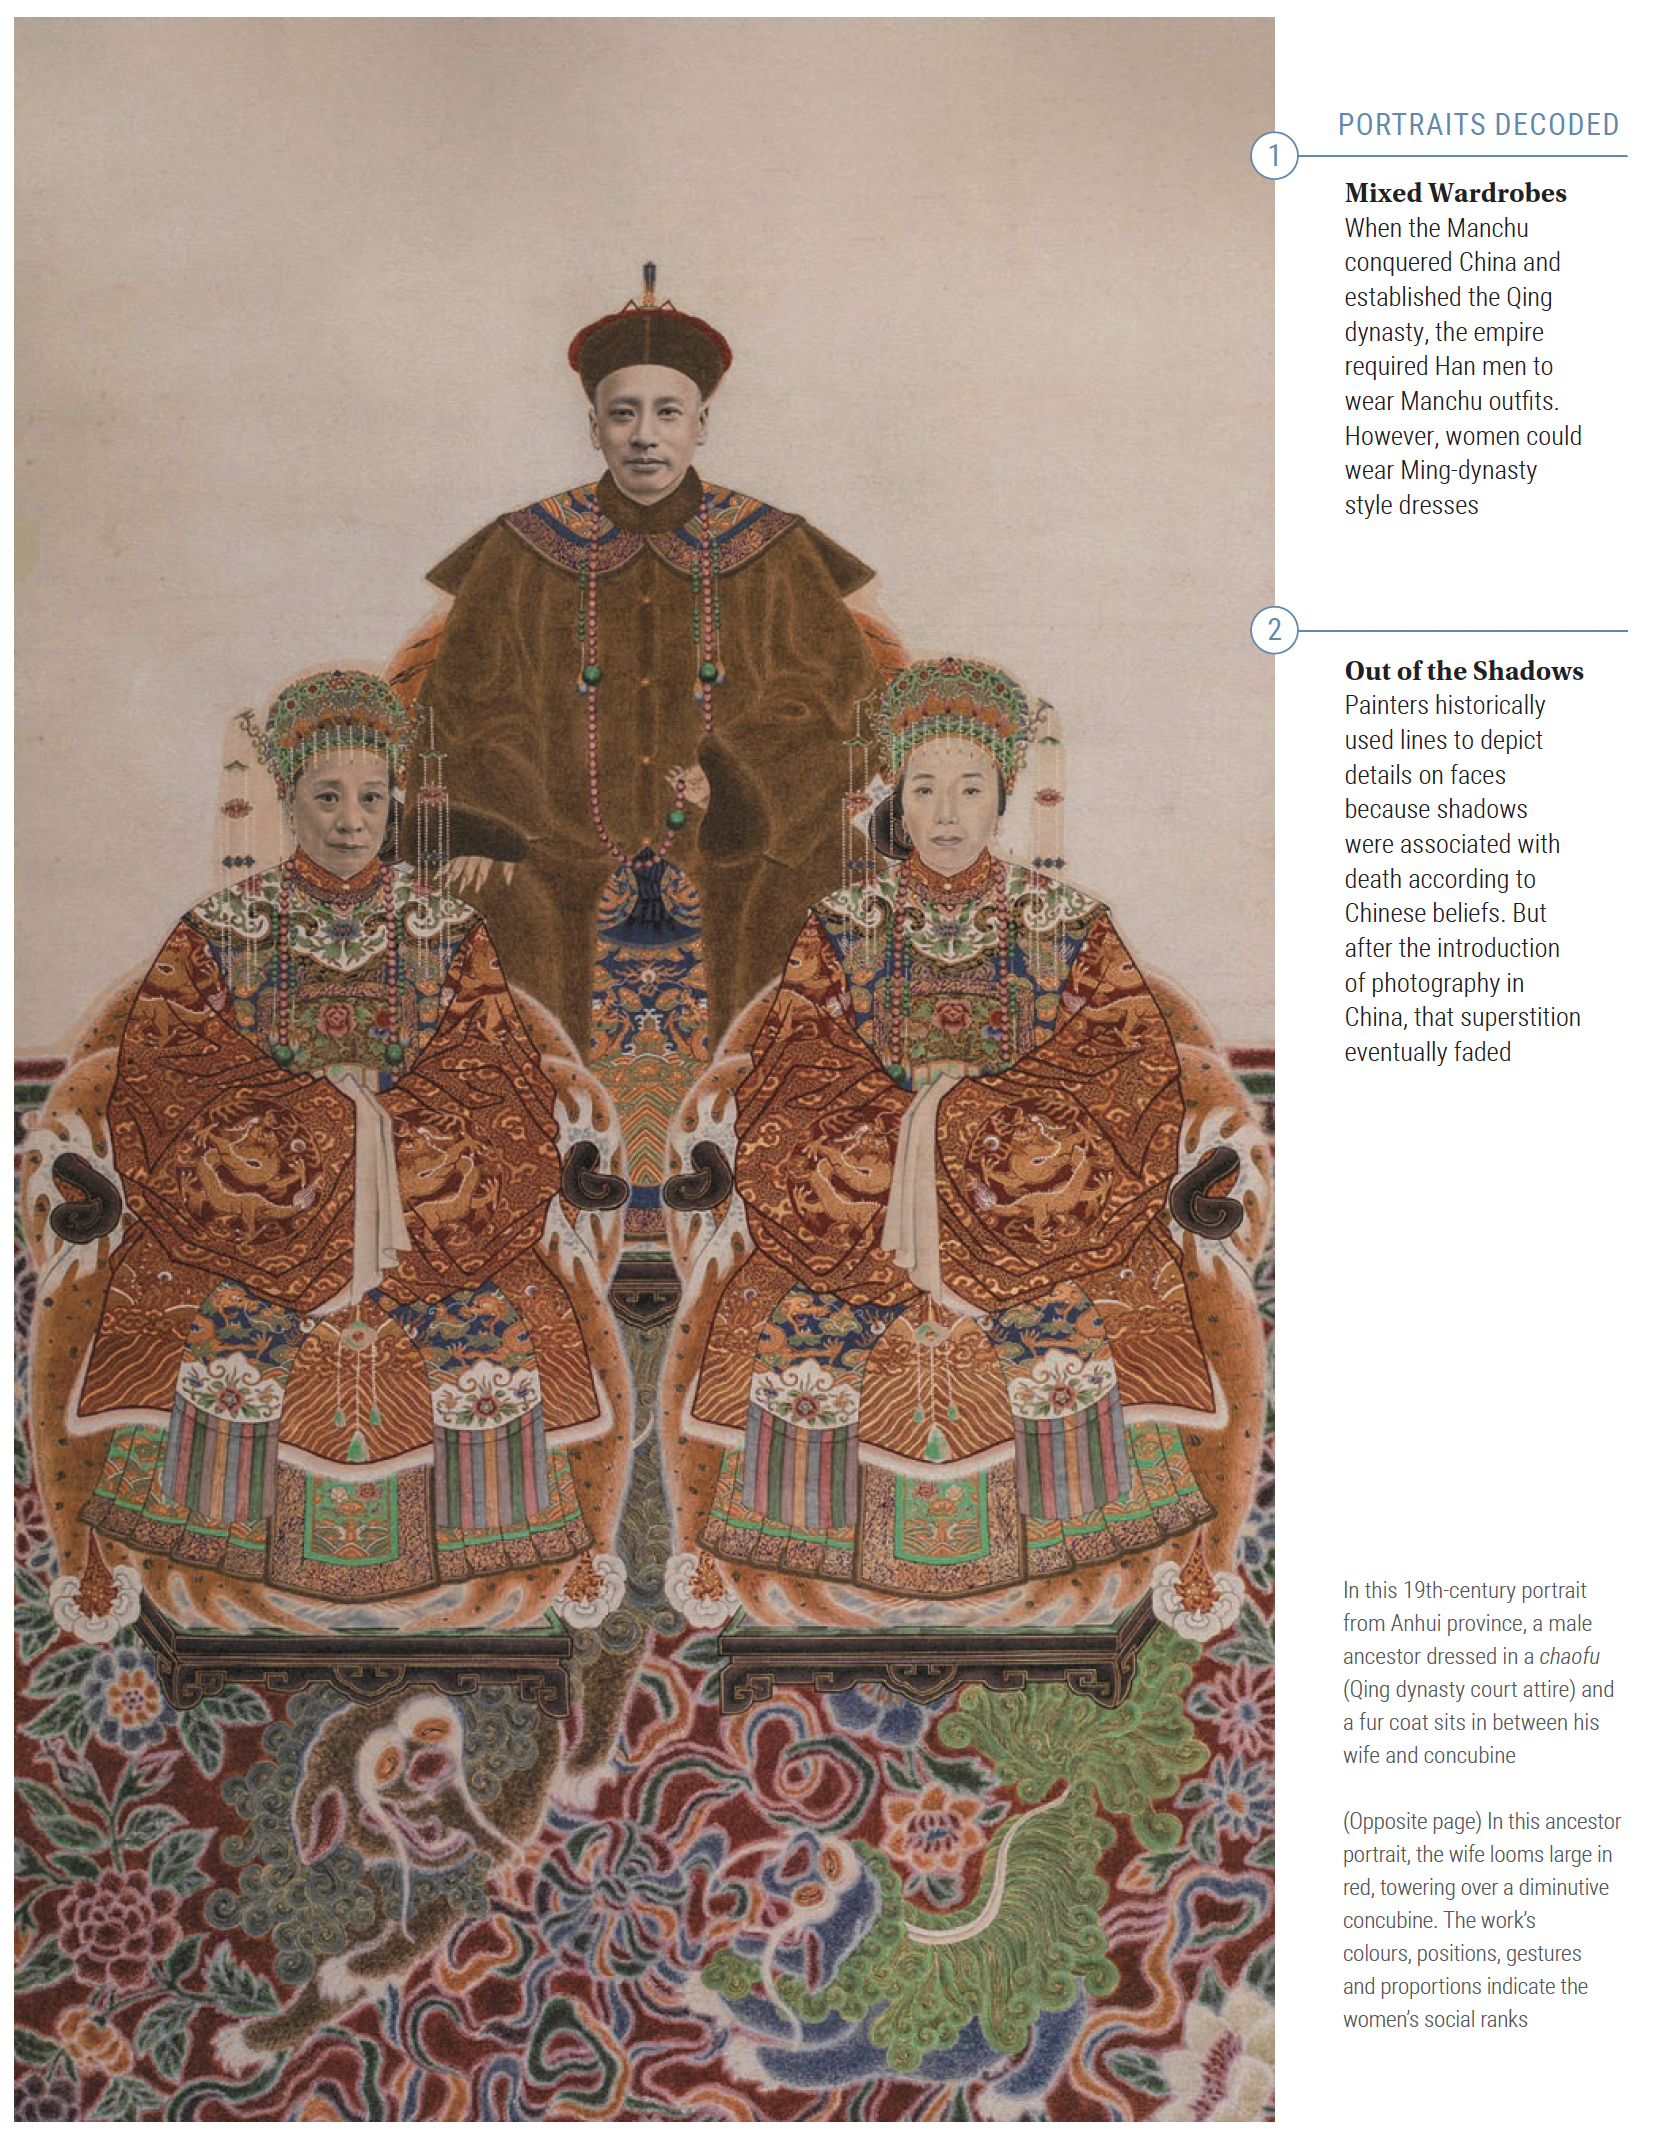 A male ancestor dressed in a chaofu (Qing dynasty court attire) and a fur coat sits in between his wife and concubine